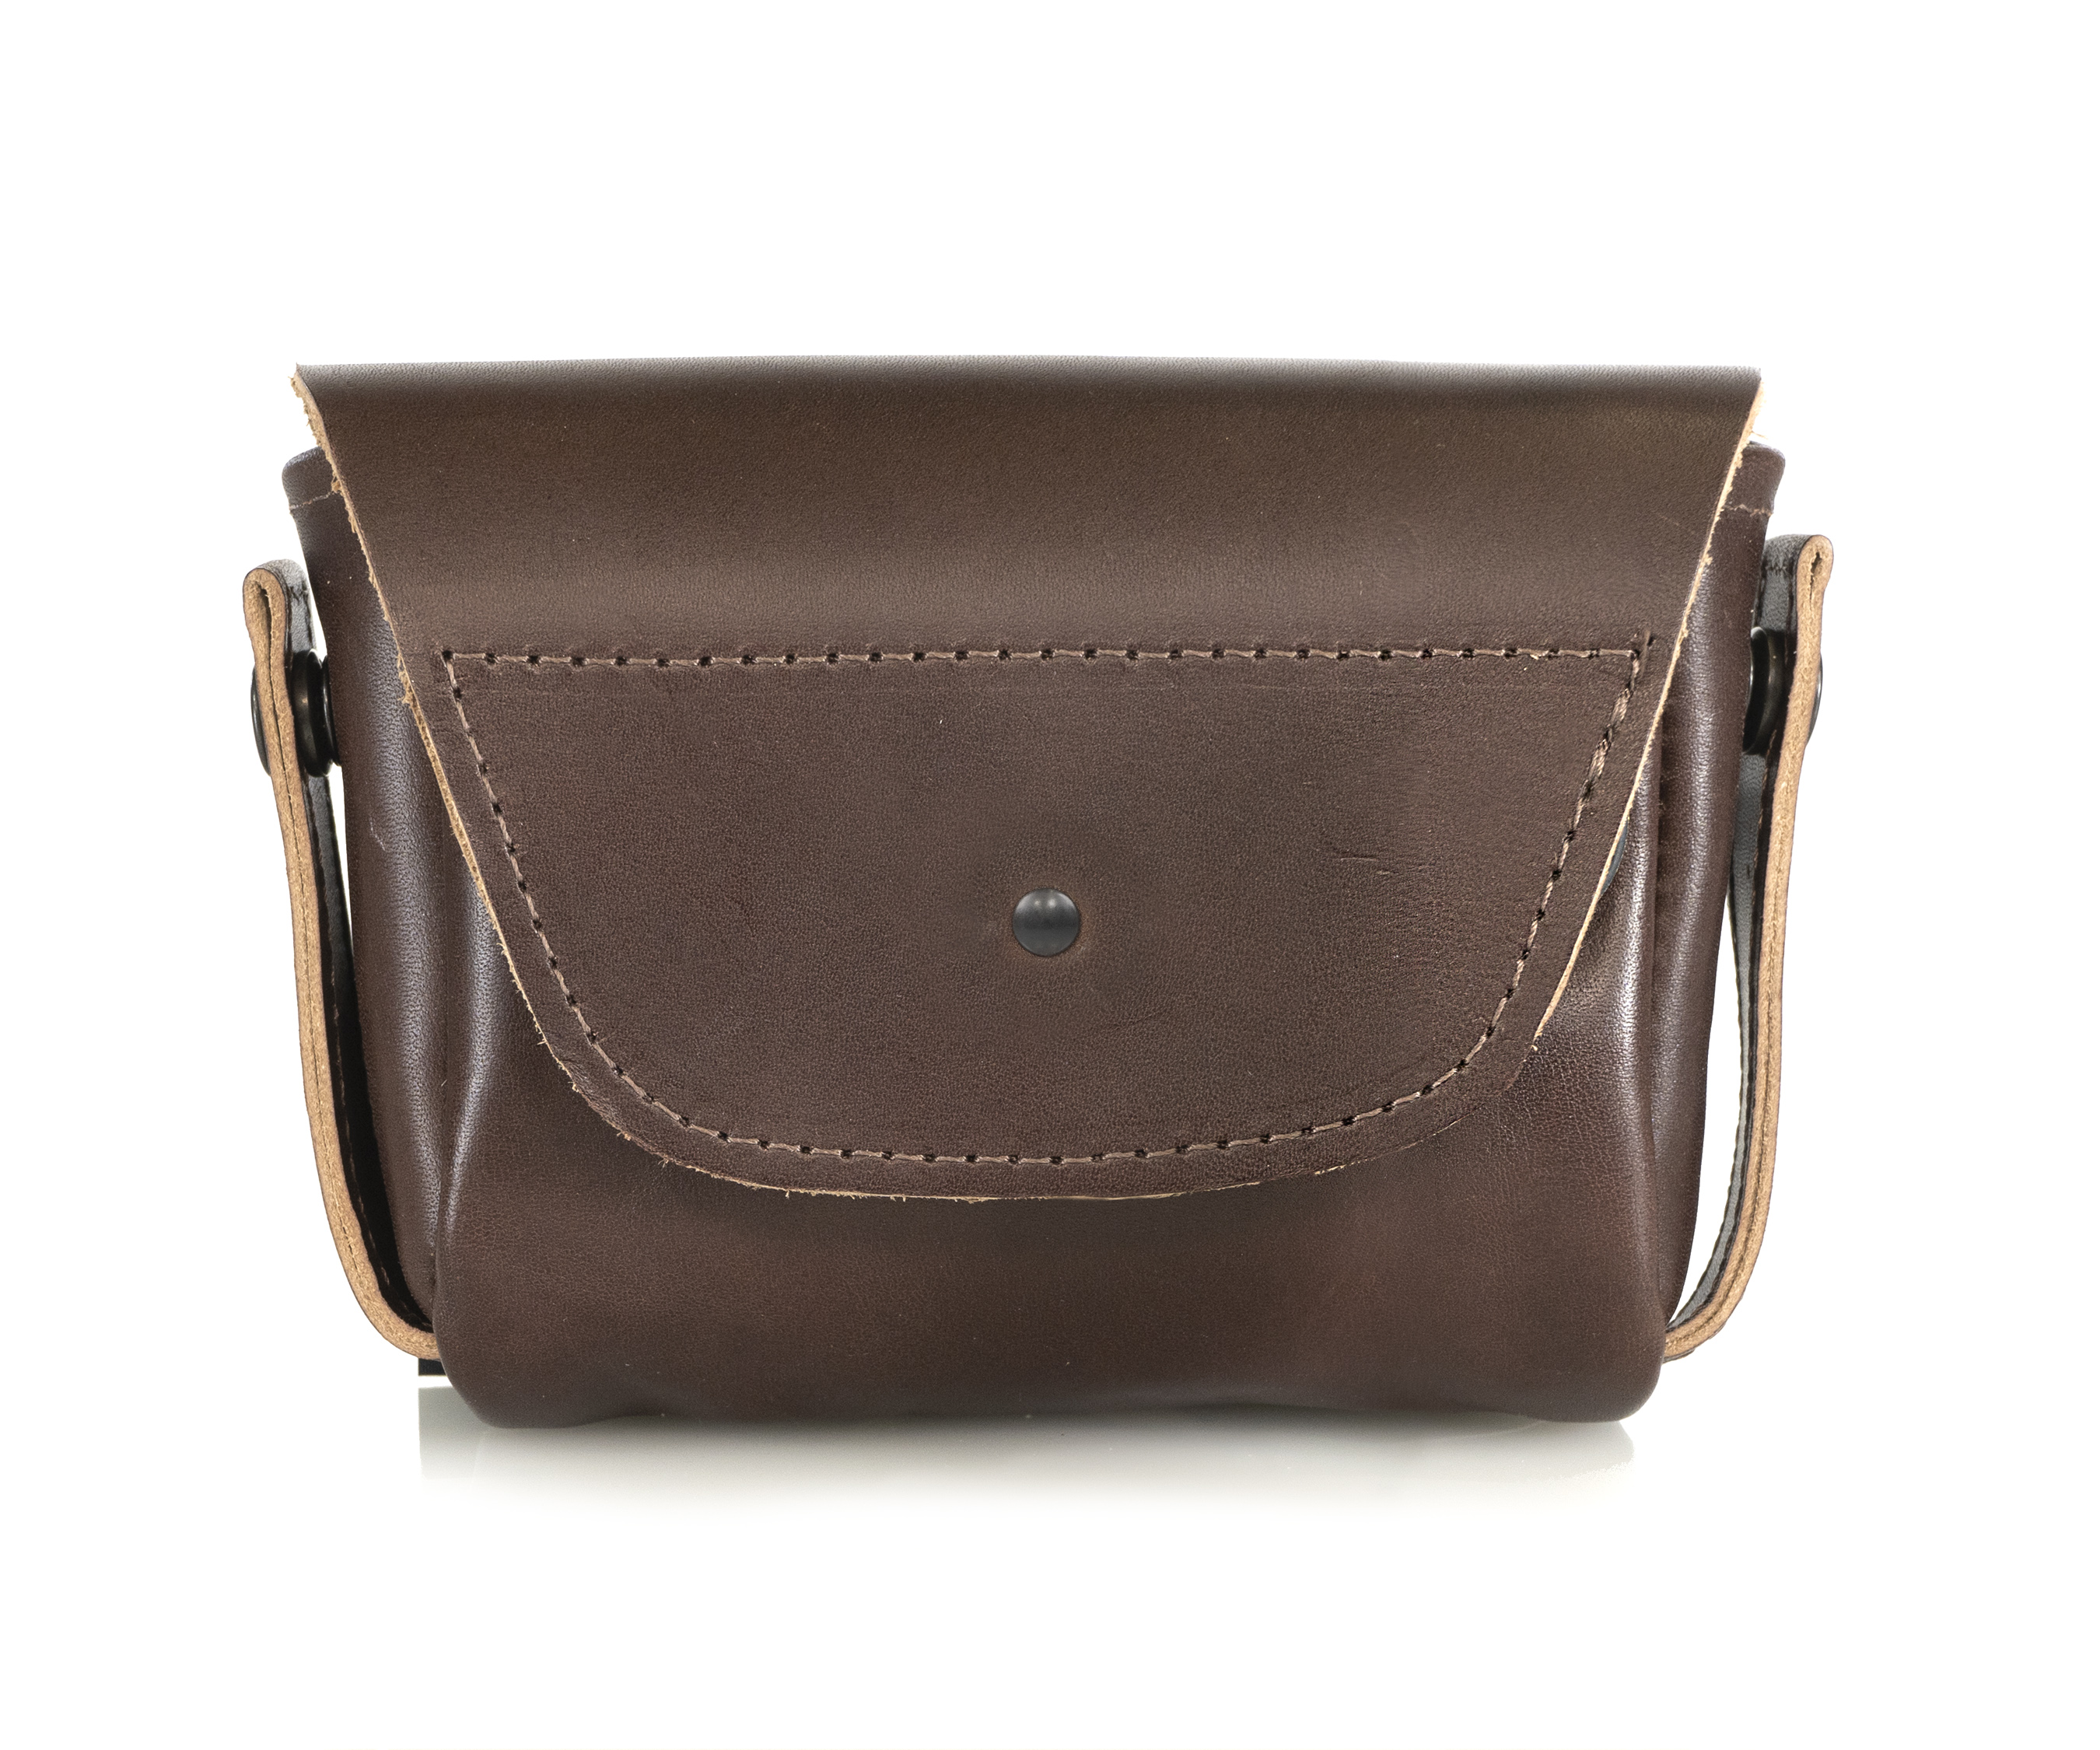 Wag Hip Pack in dark brown leather